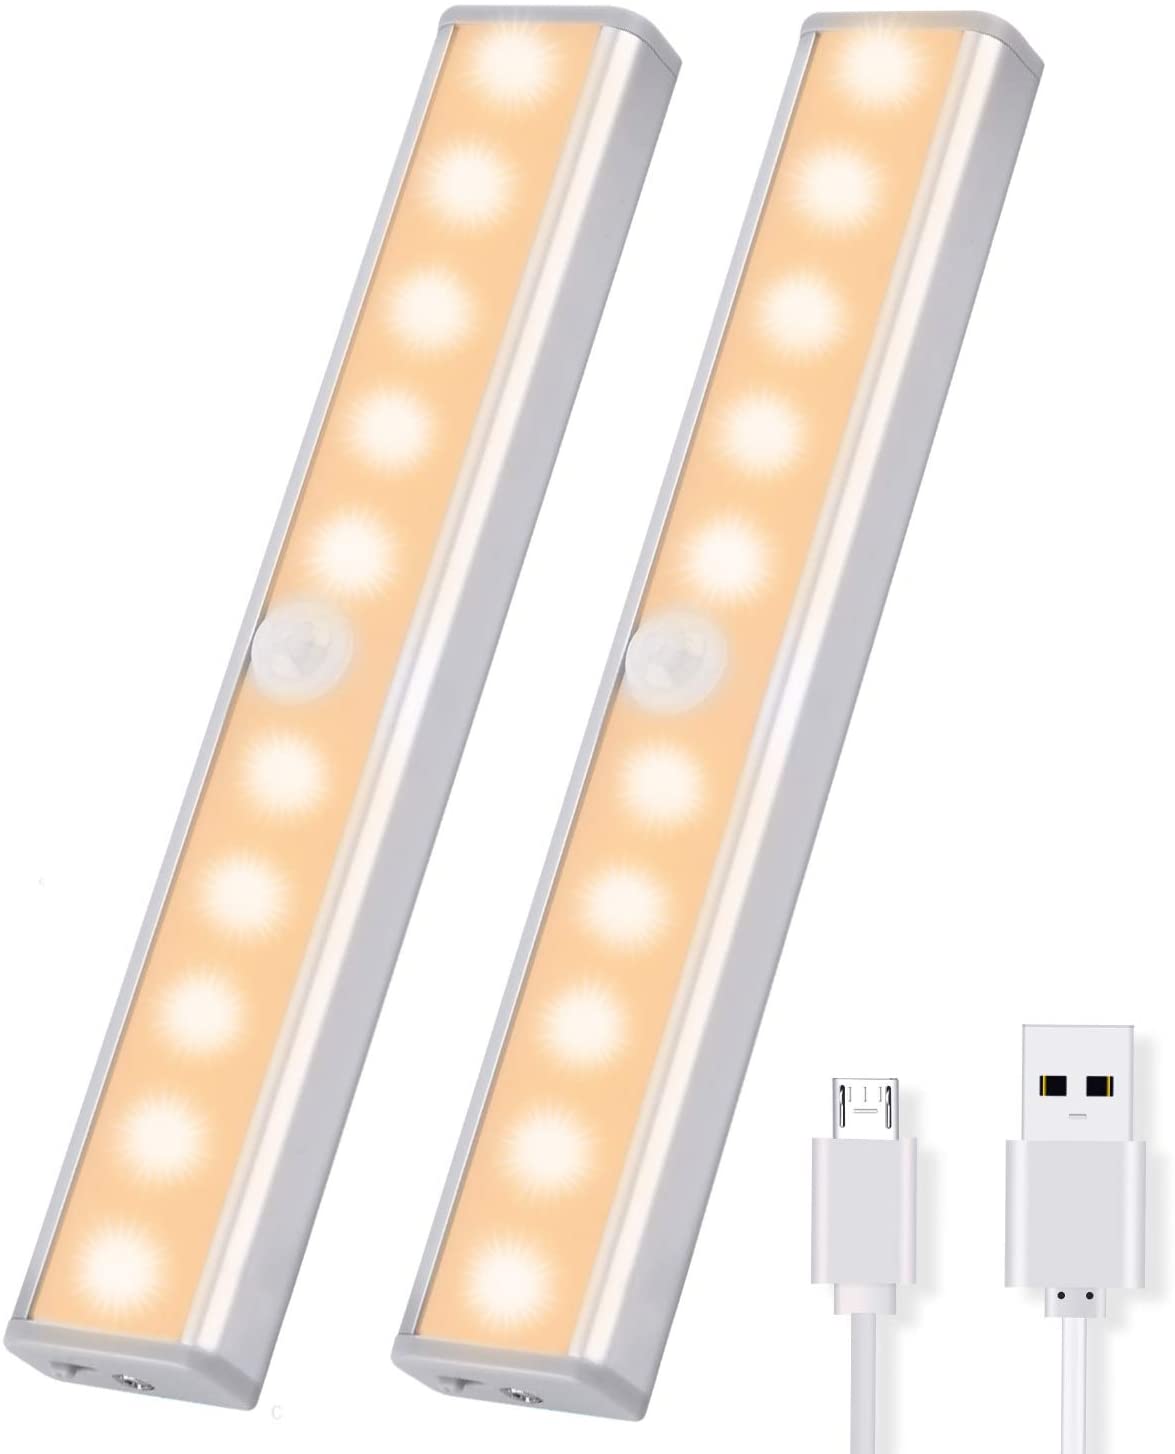 OUSFOT LED Closet Light Under Cabinet Lighting Motion Sensor Light 20 Led Stick-on Anywhere Wireless USB Rechargeable Battery for Cupboard// Wardrobe// Stairs// Wall 4 Pack